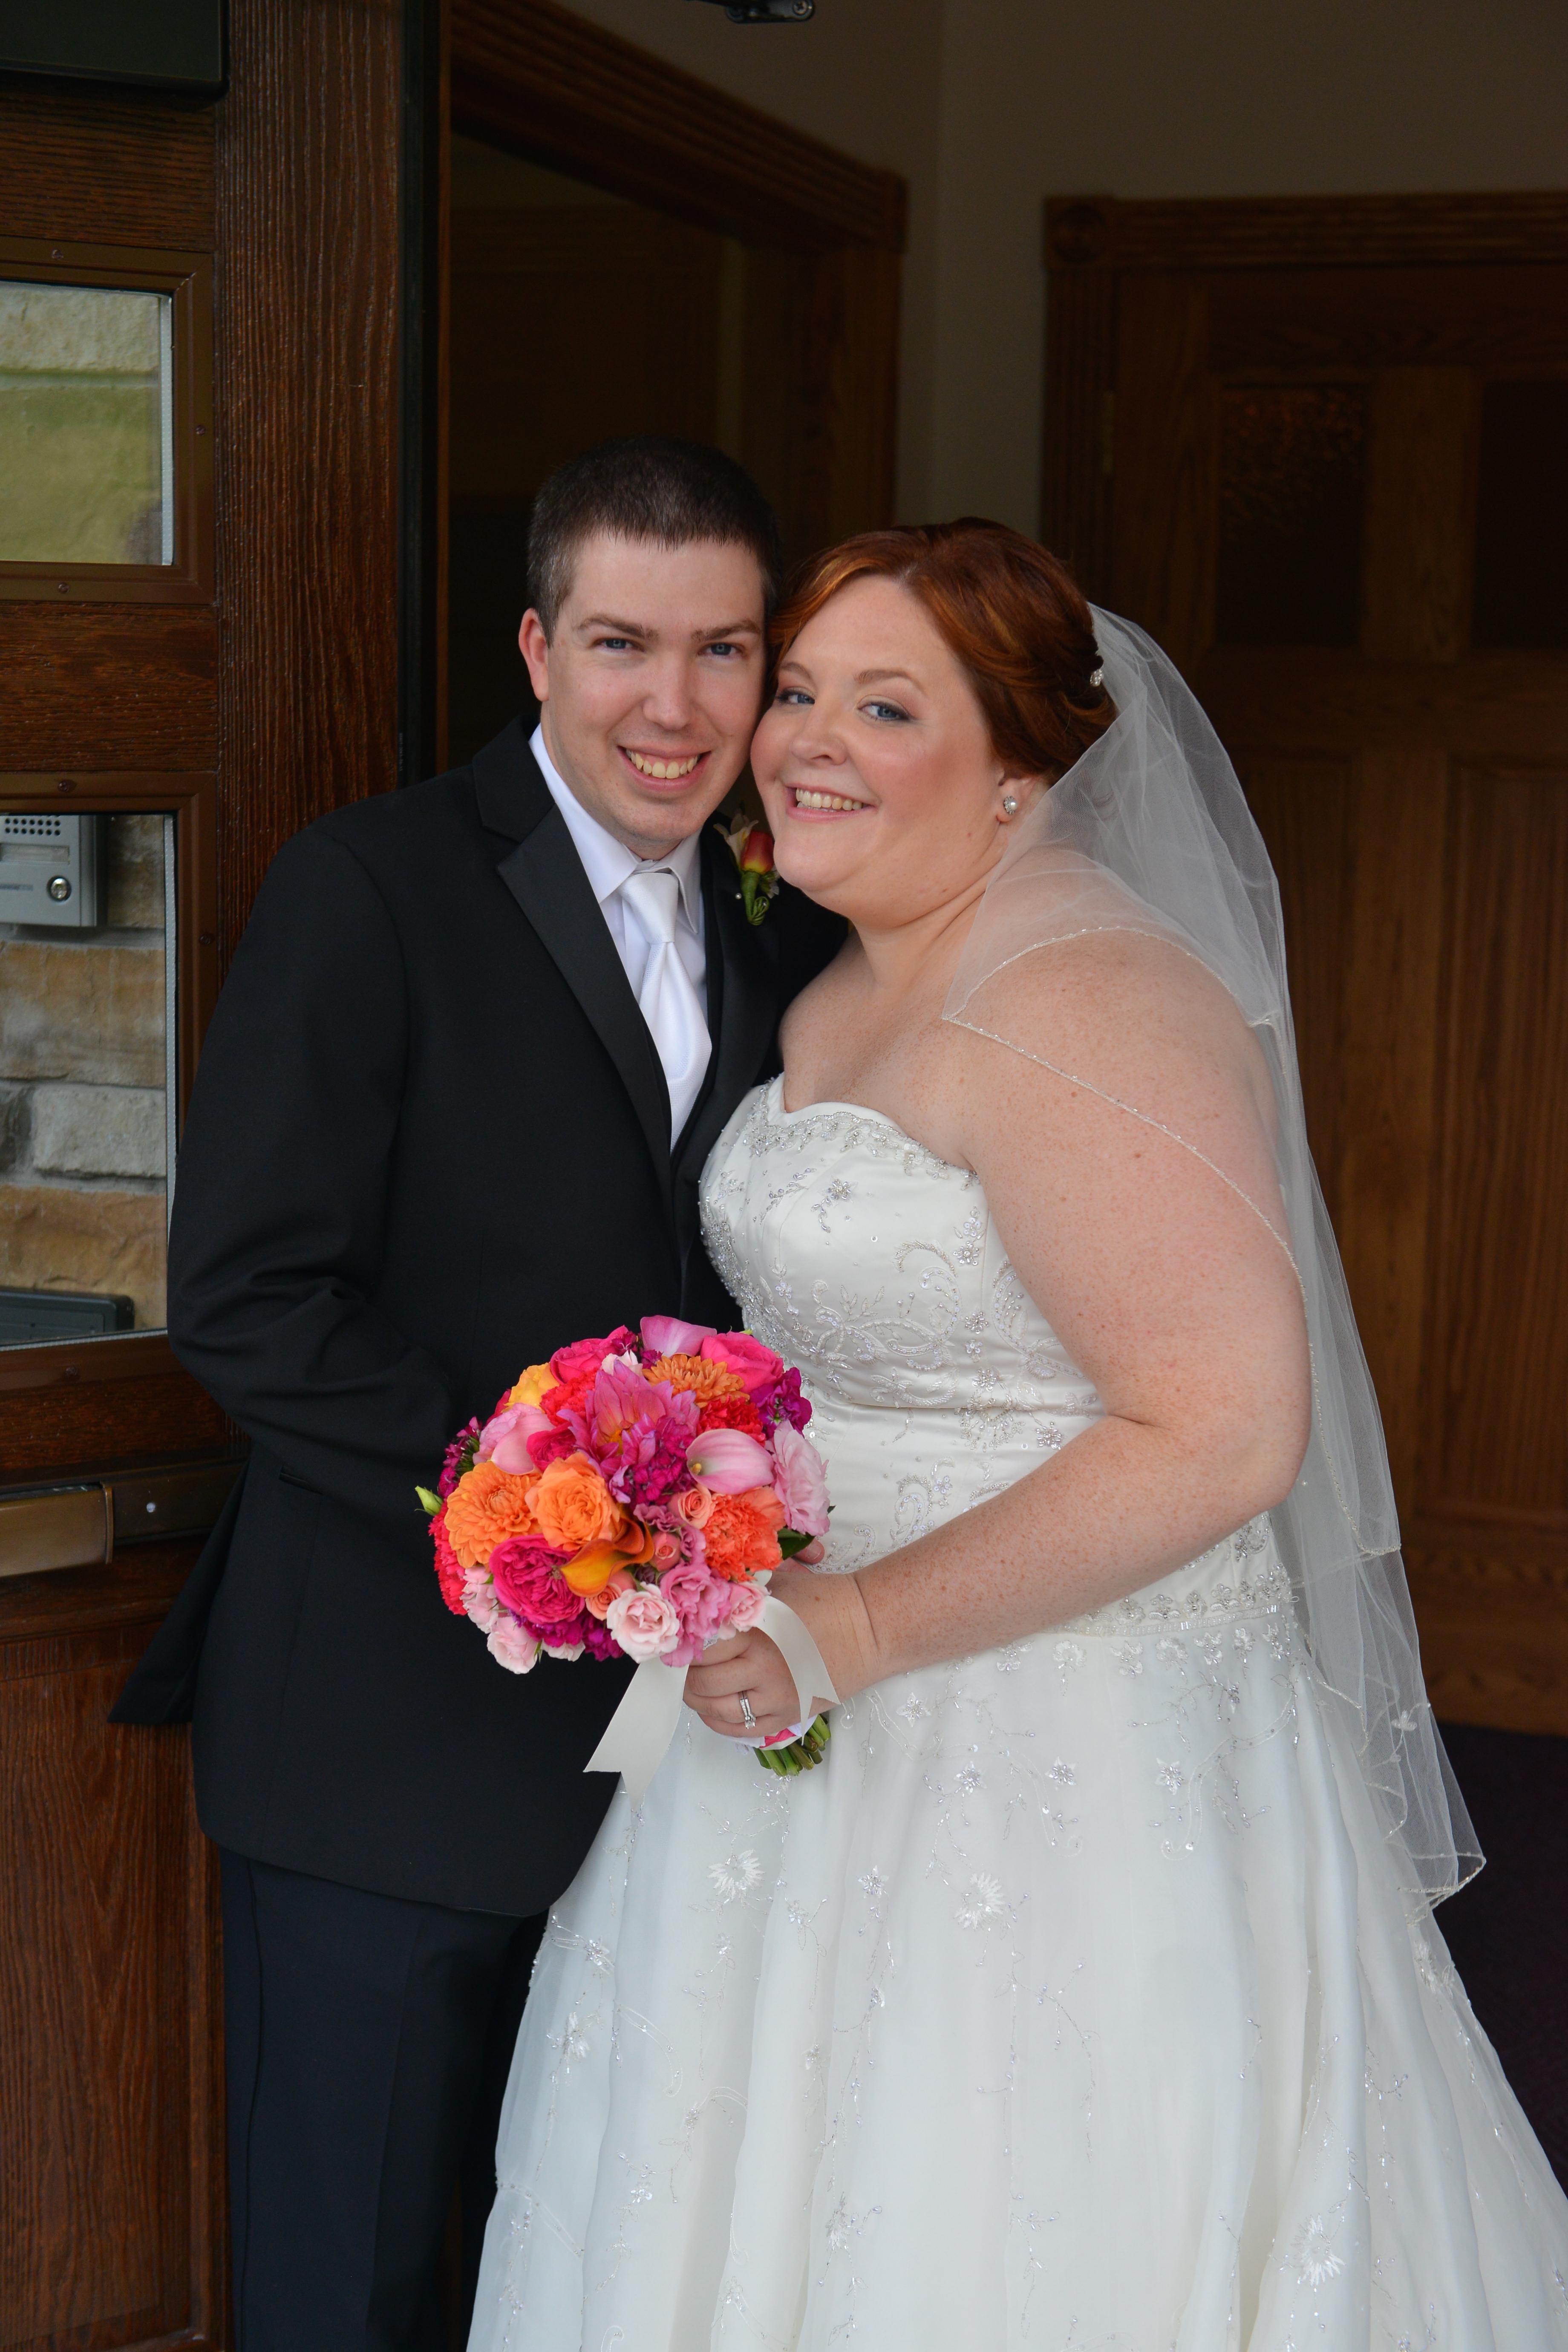 Andrew and Erin Cody married July 18, 2015